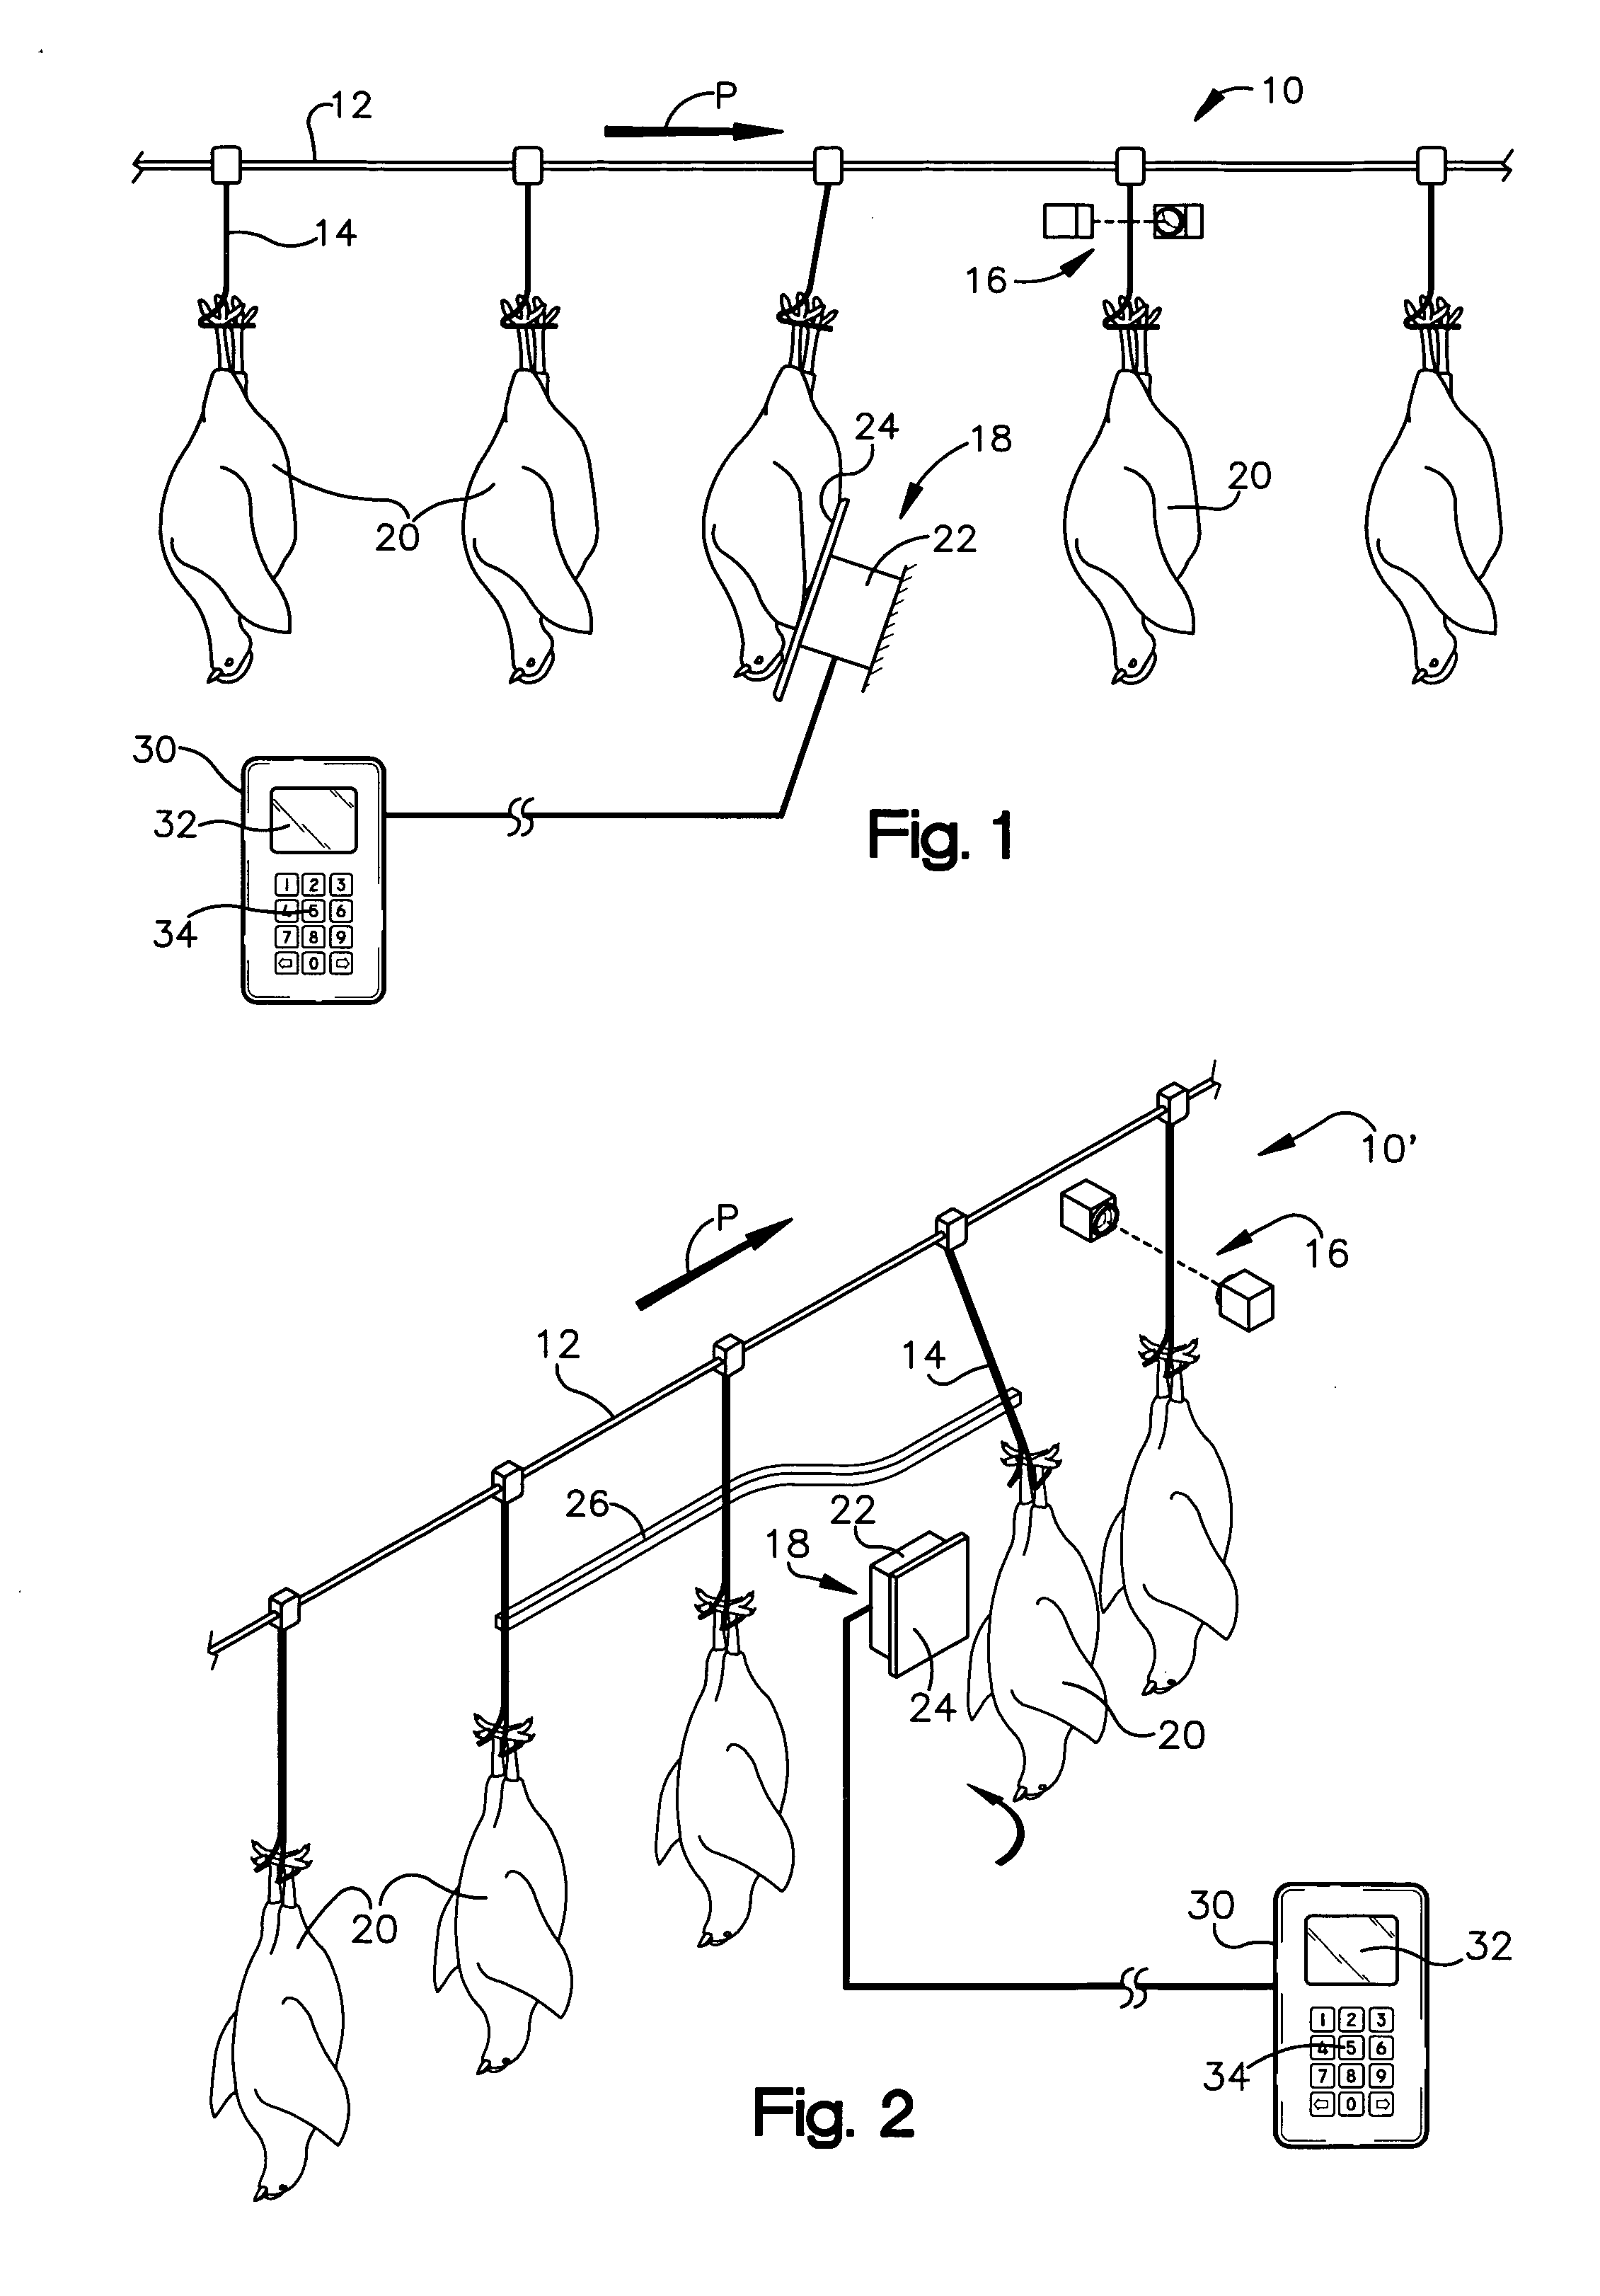 Overhead poultry conveying and counting system